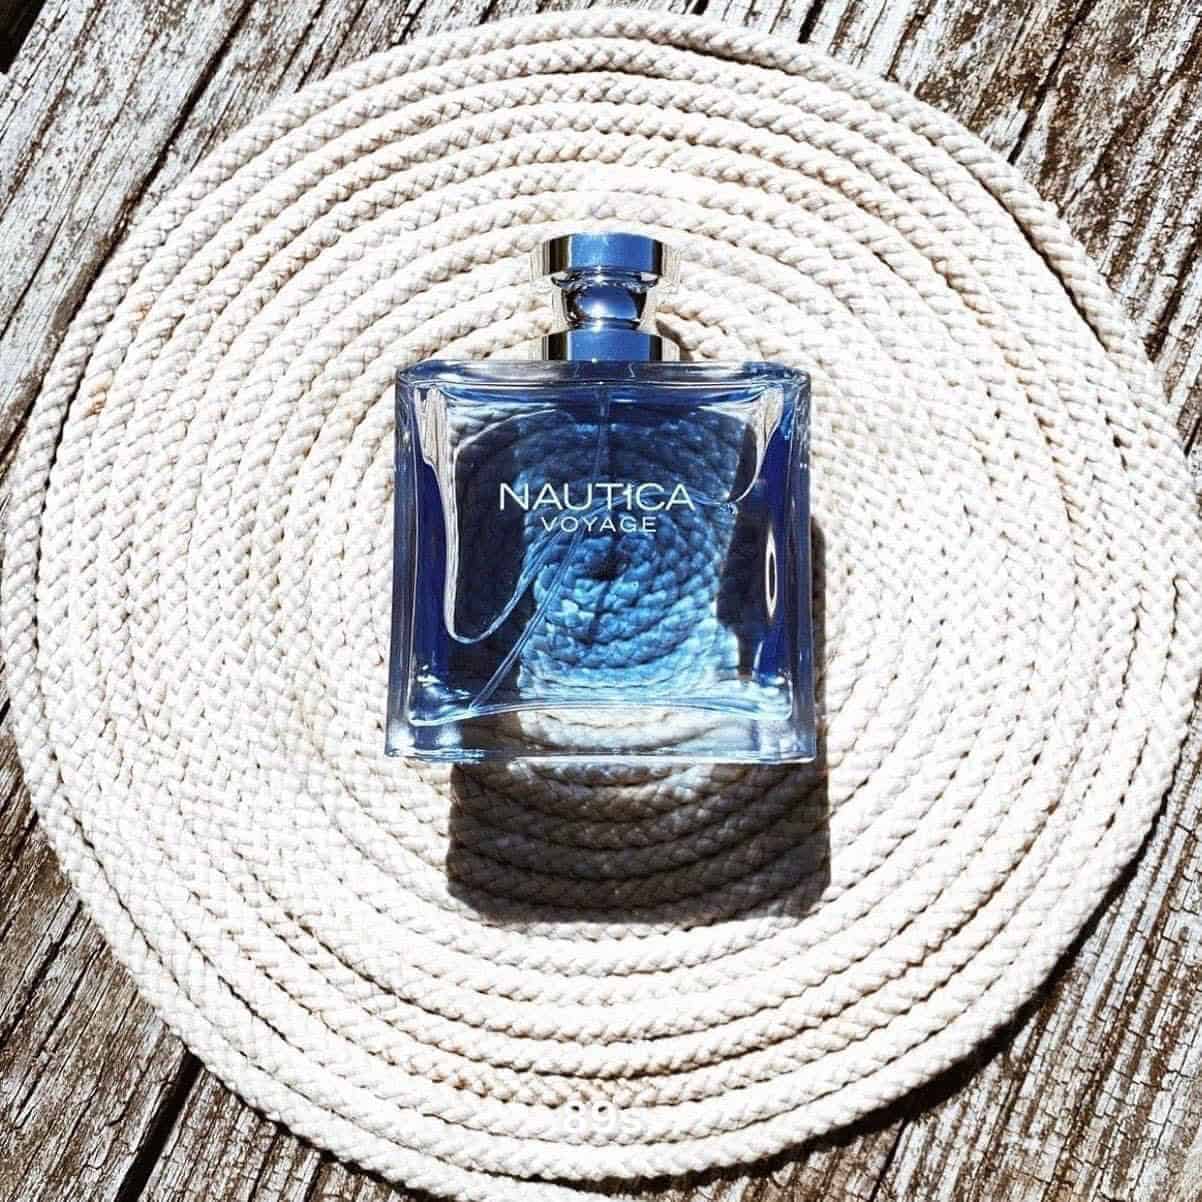 a bottle of nautica voyage on top of a rolled rope